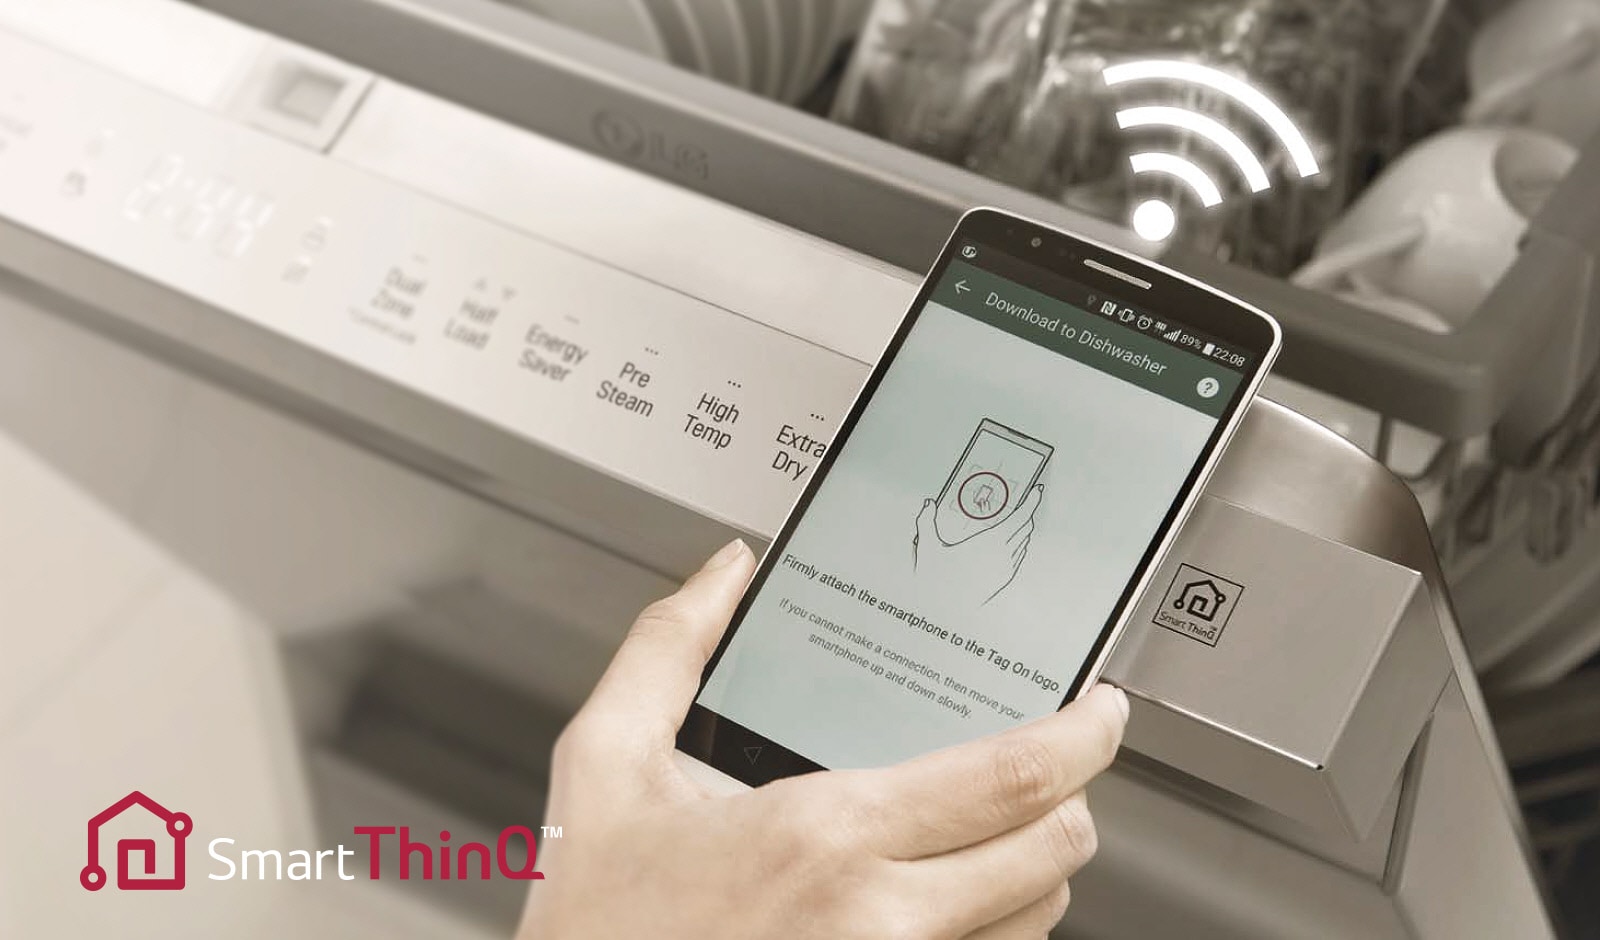 Innovation for a Smarter, Connected Home1